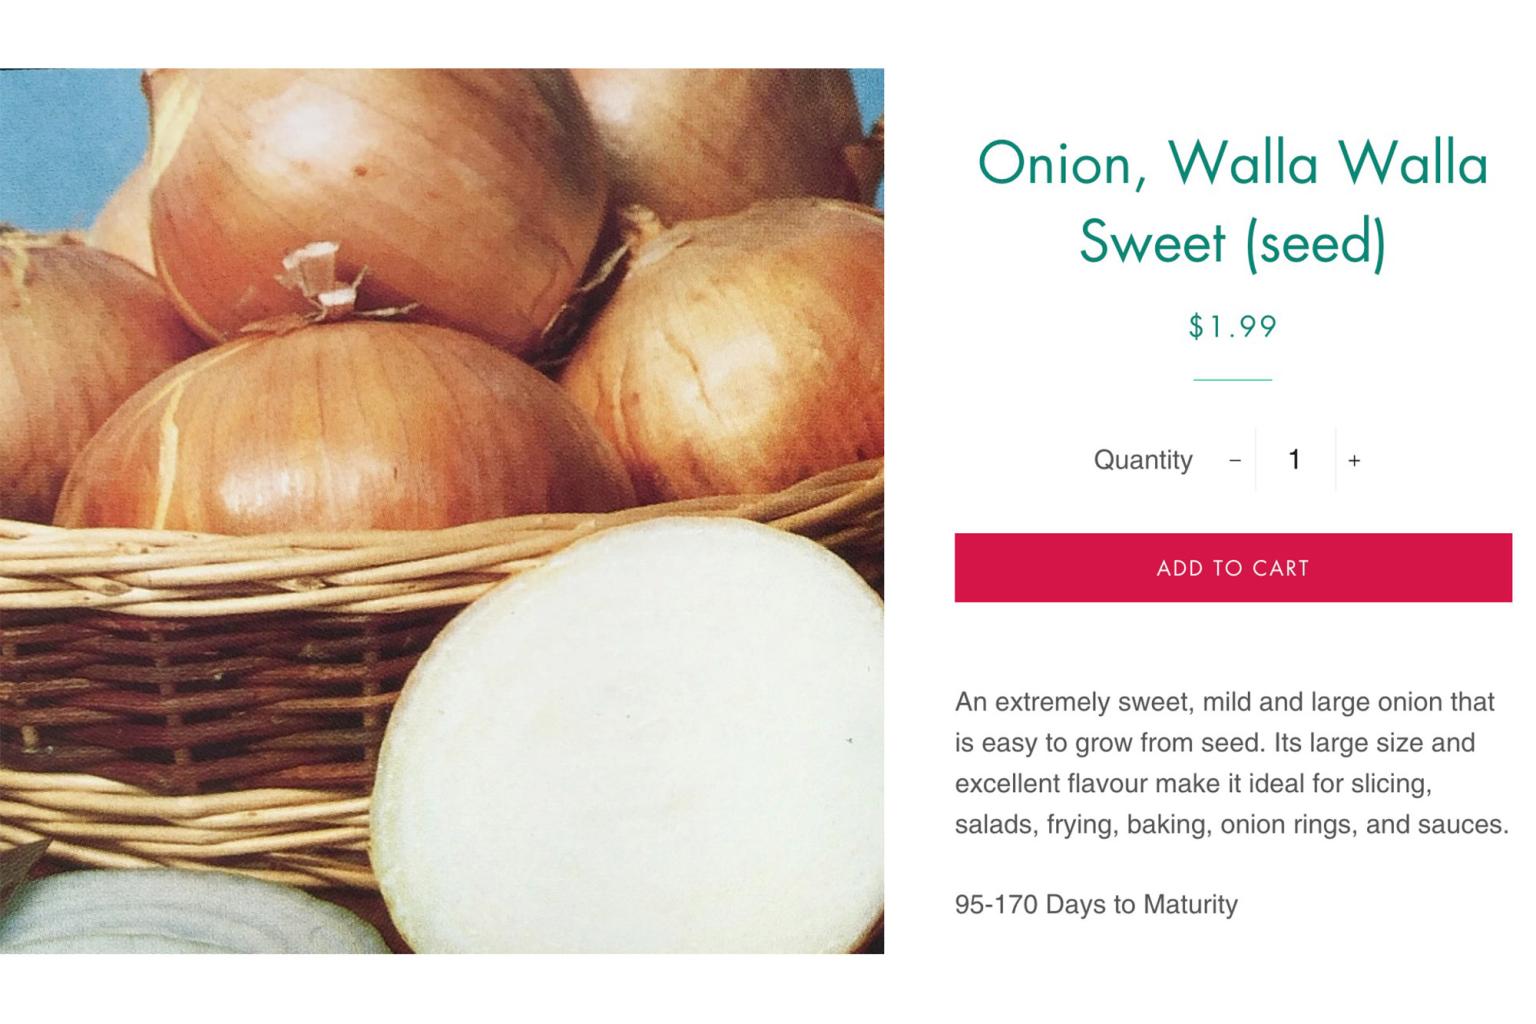 Facebook banned a Canadian seed company’s ad featuring onions — labeling it “overtly sexual” in an algorithm mess-up